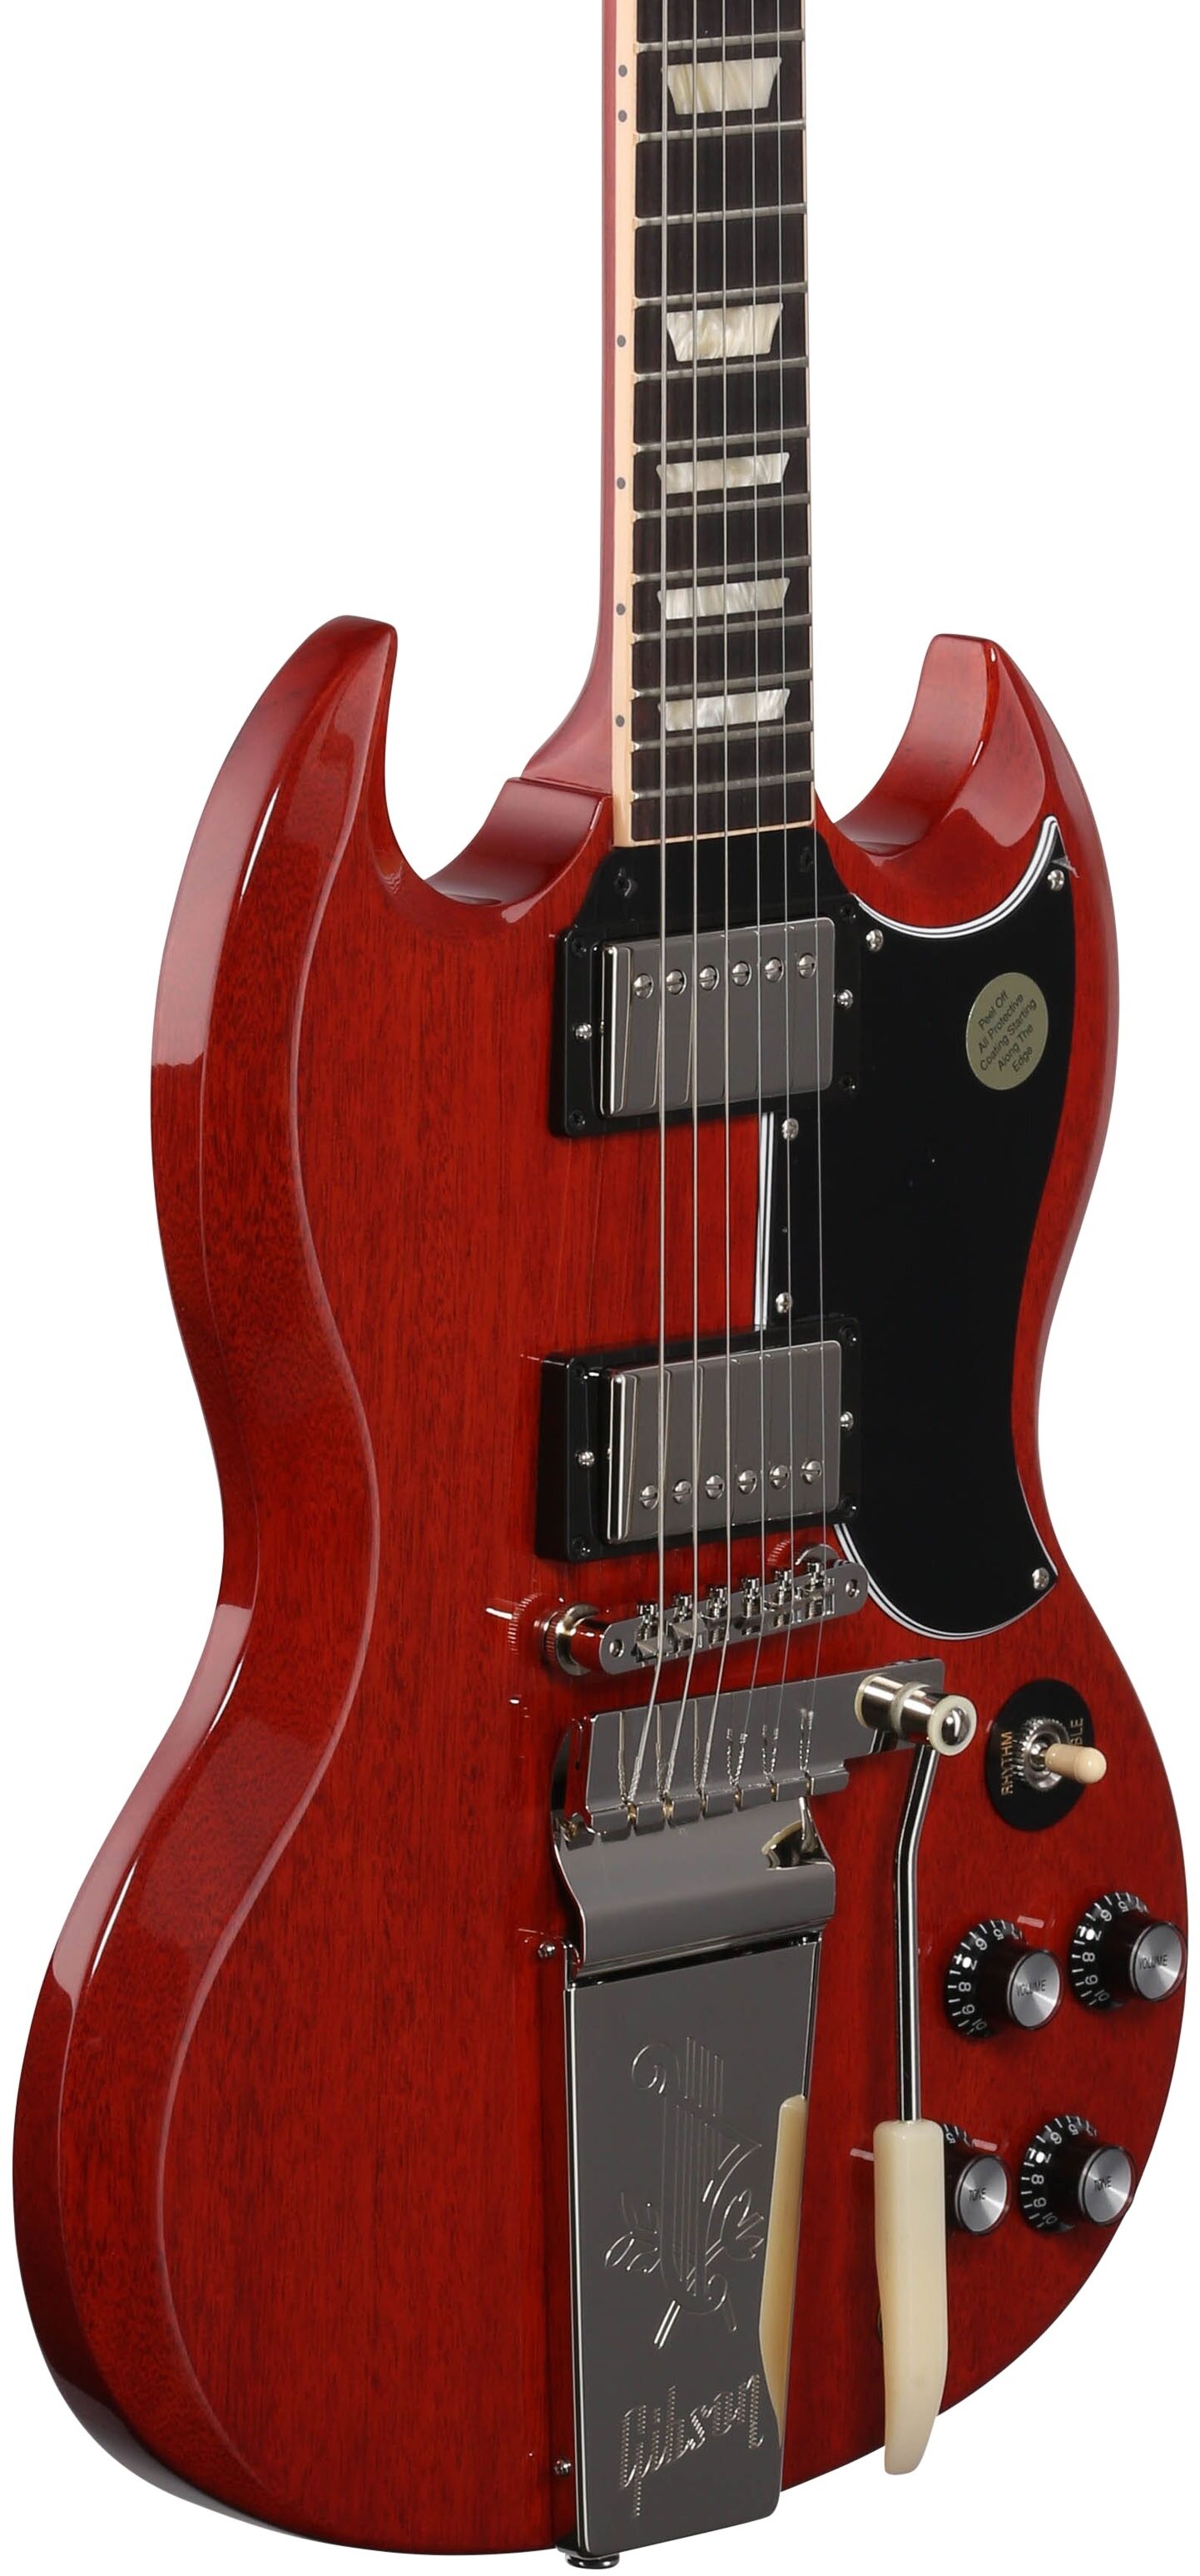 Gibson SG Standard '61 Maestro Vibrola Electric Guitar (with Case)